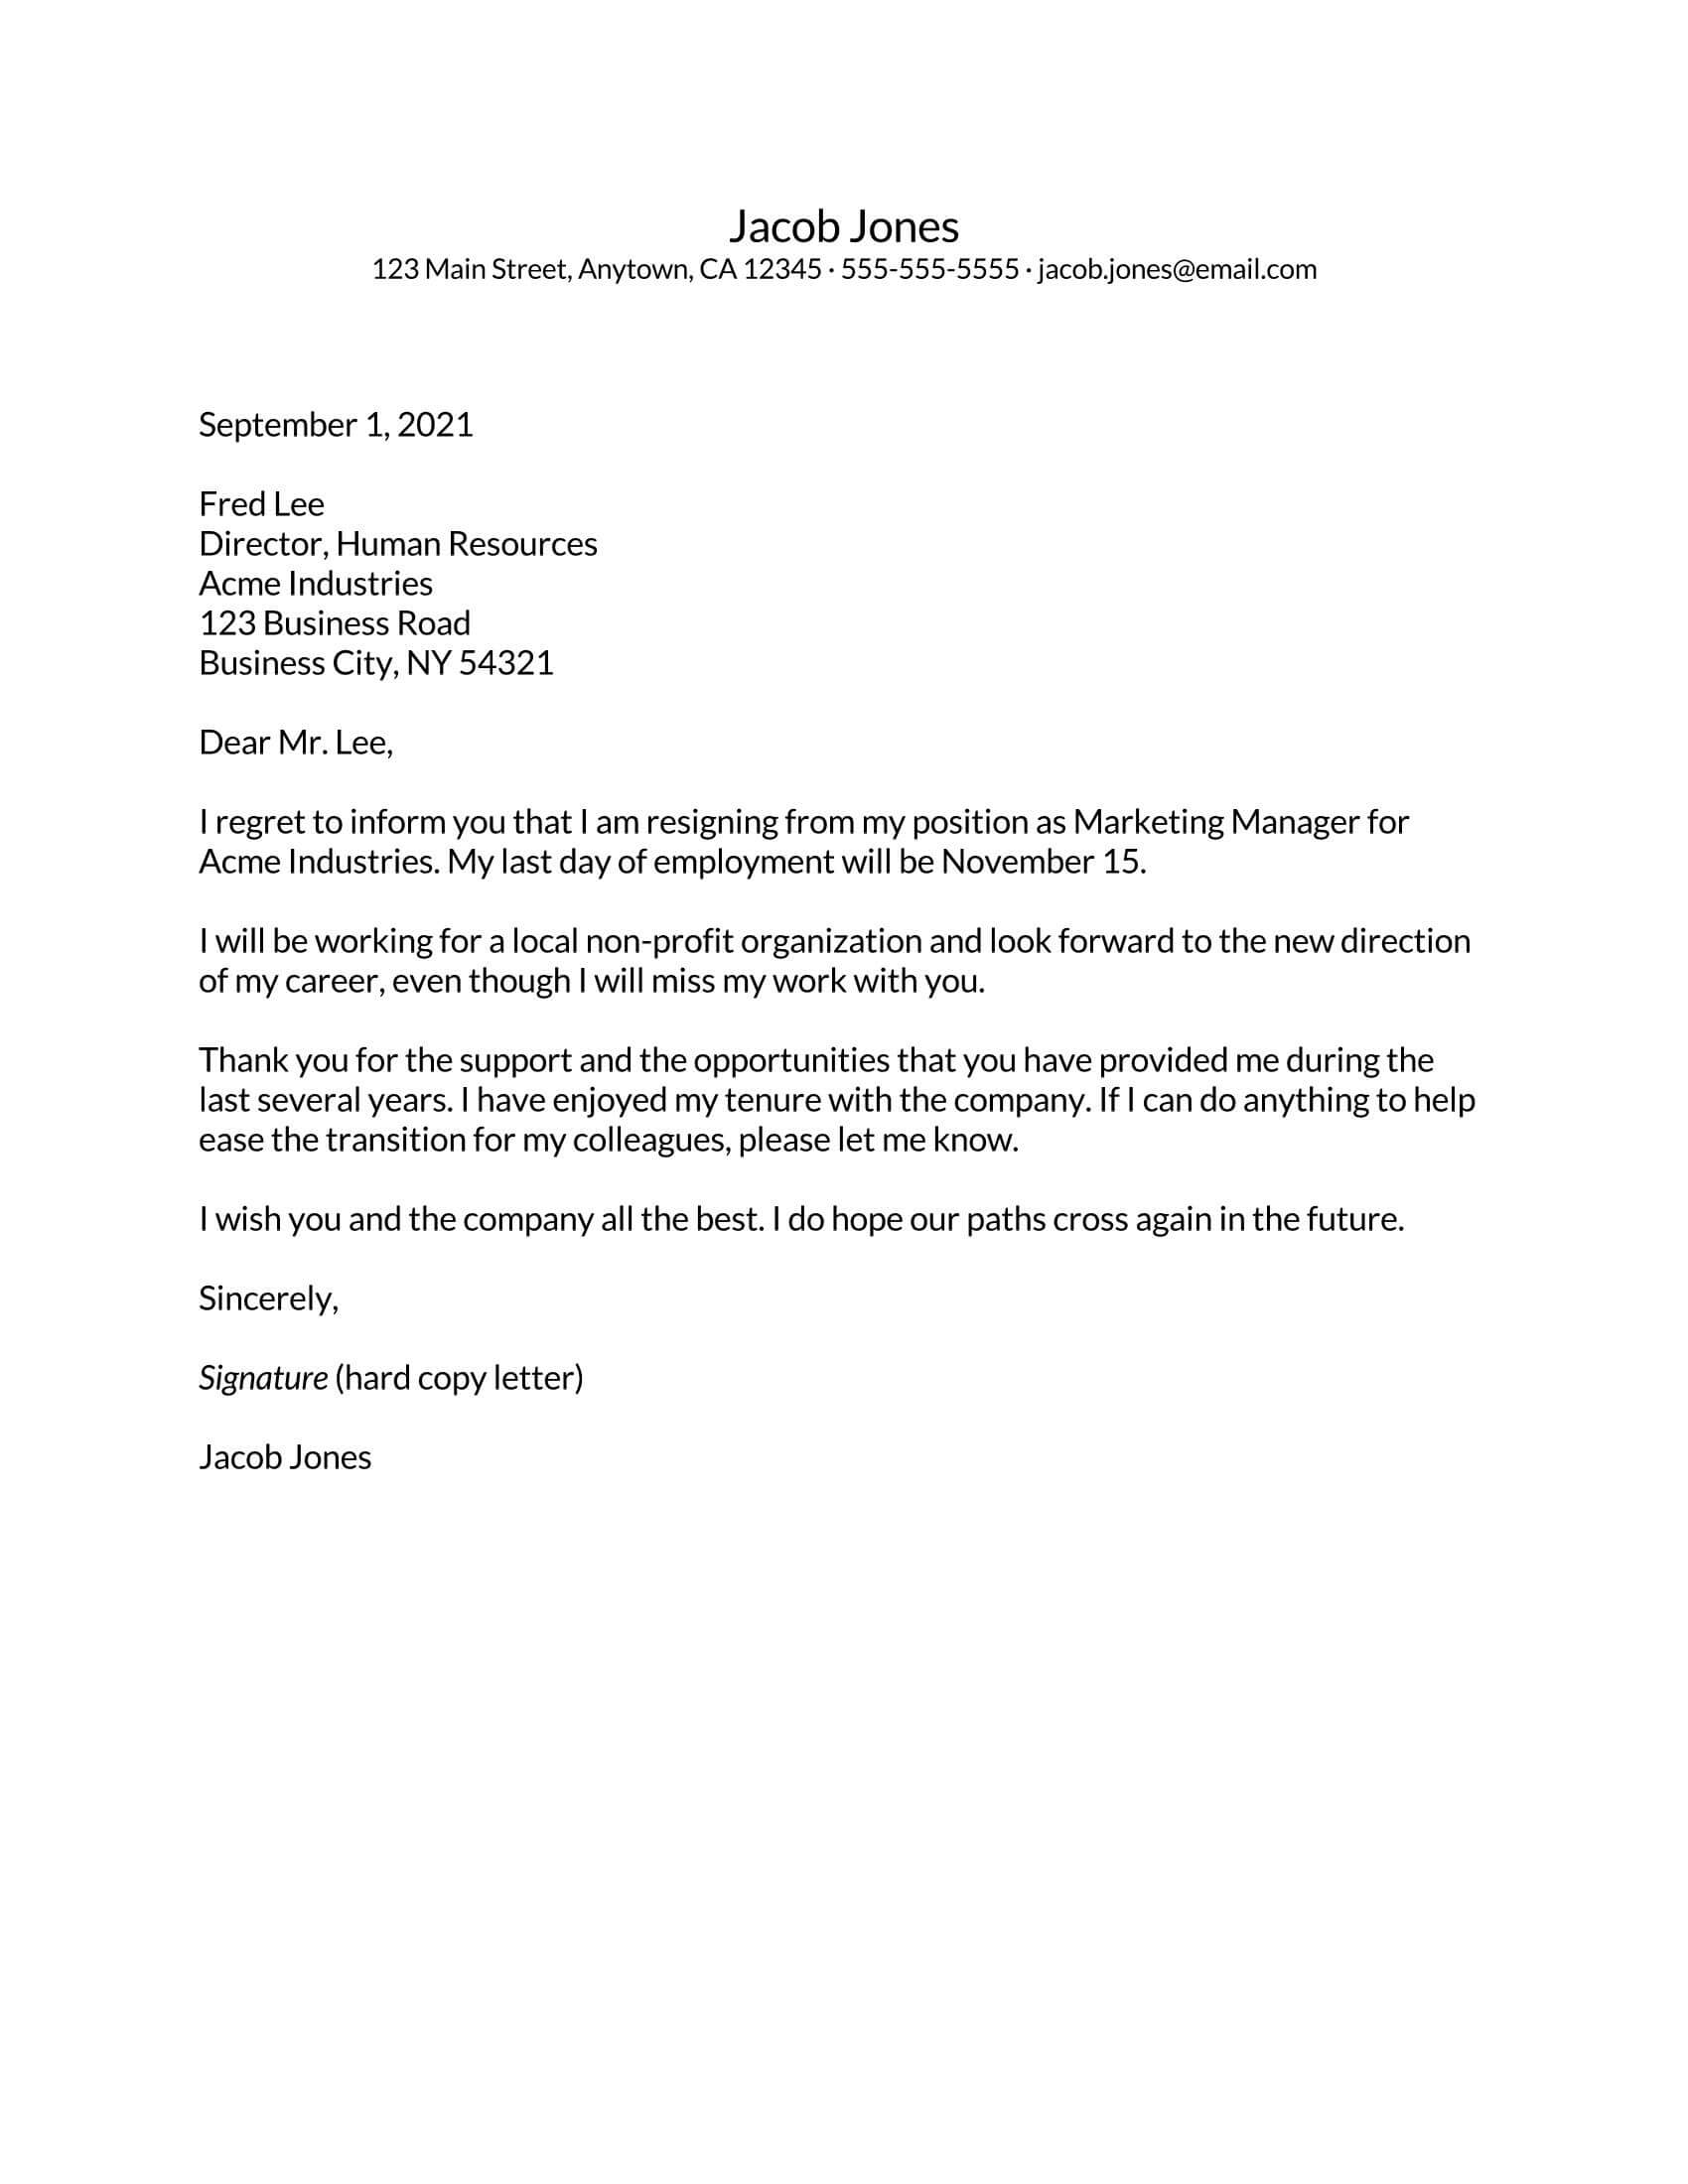 Career Change Letter of Resignation Example_Page_1